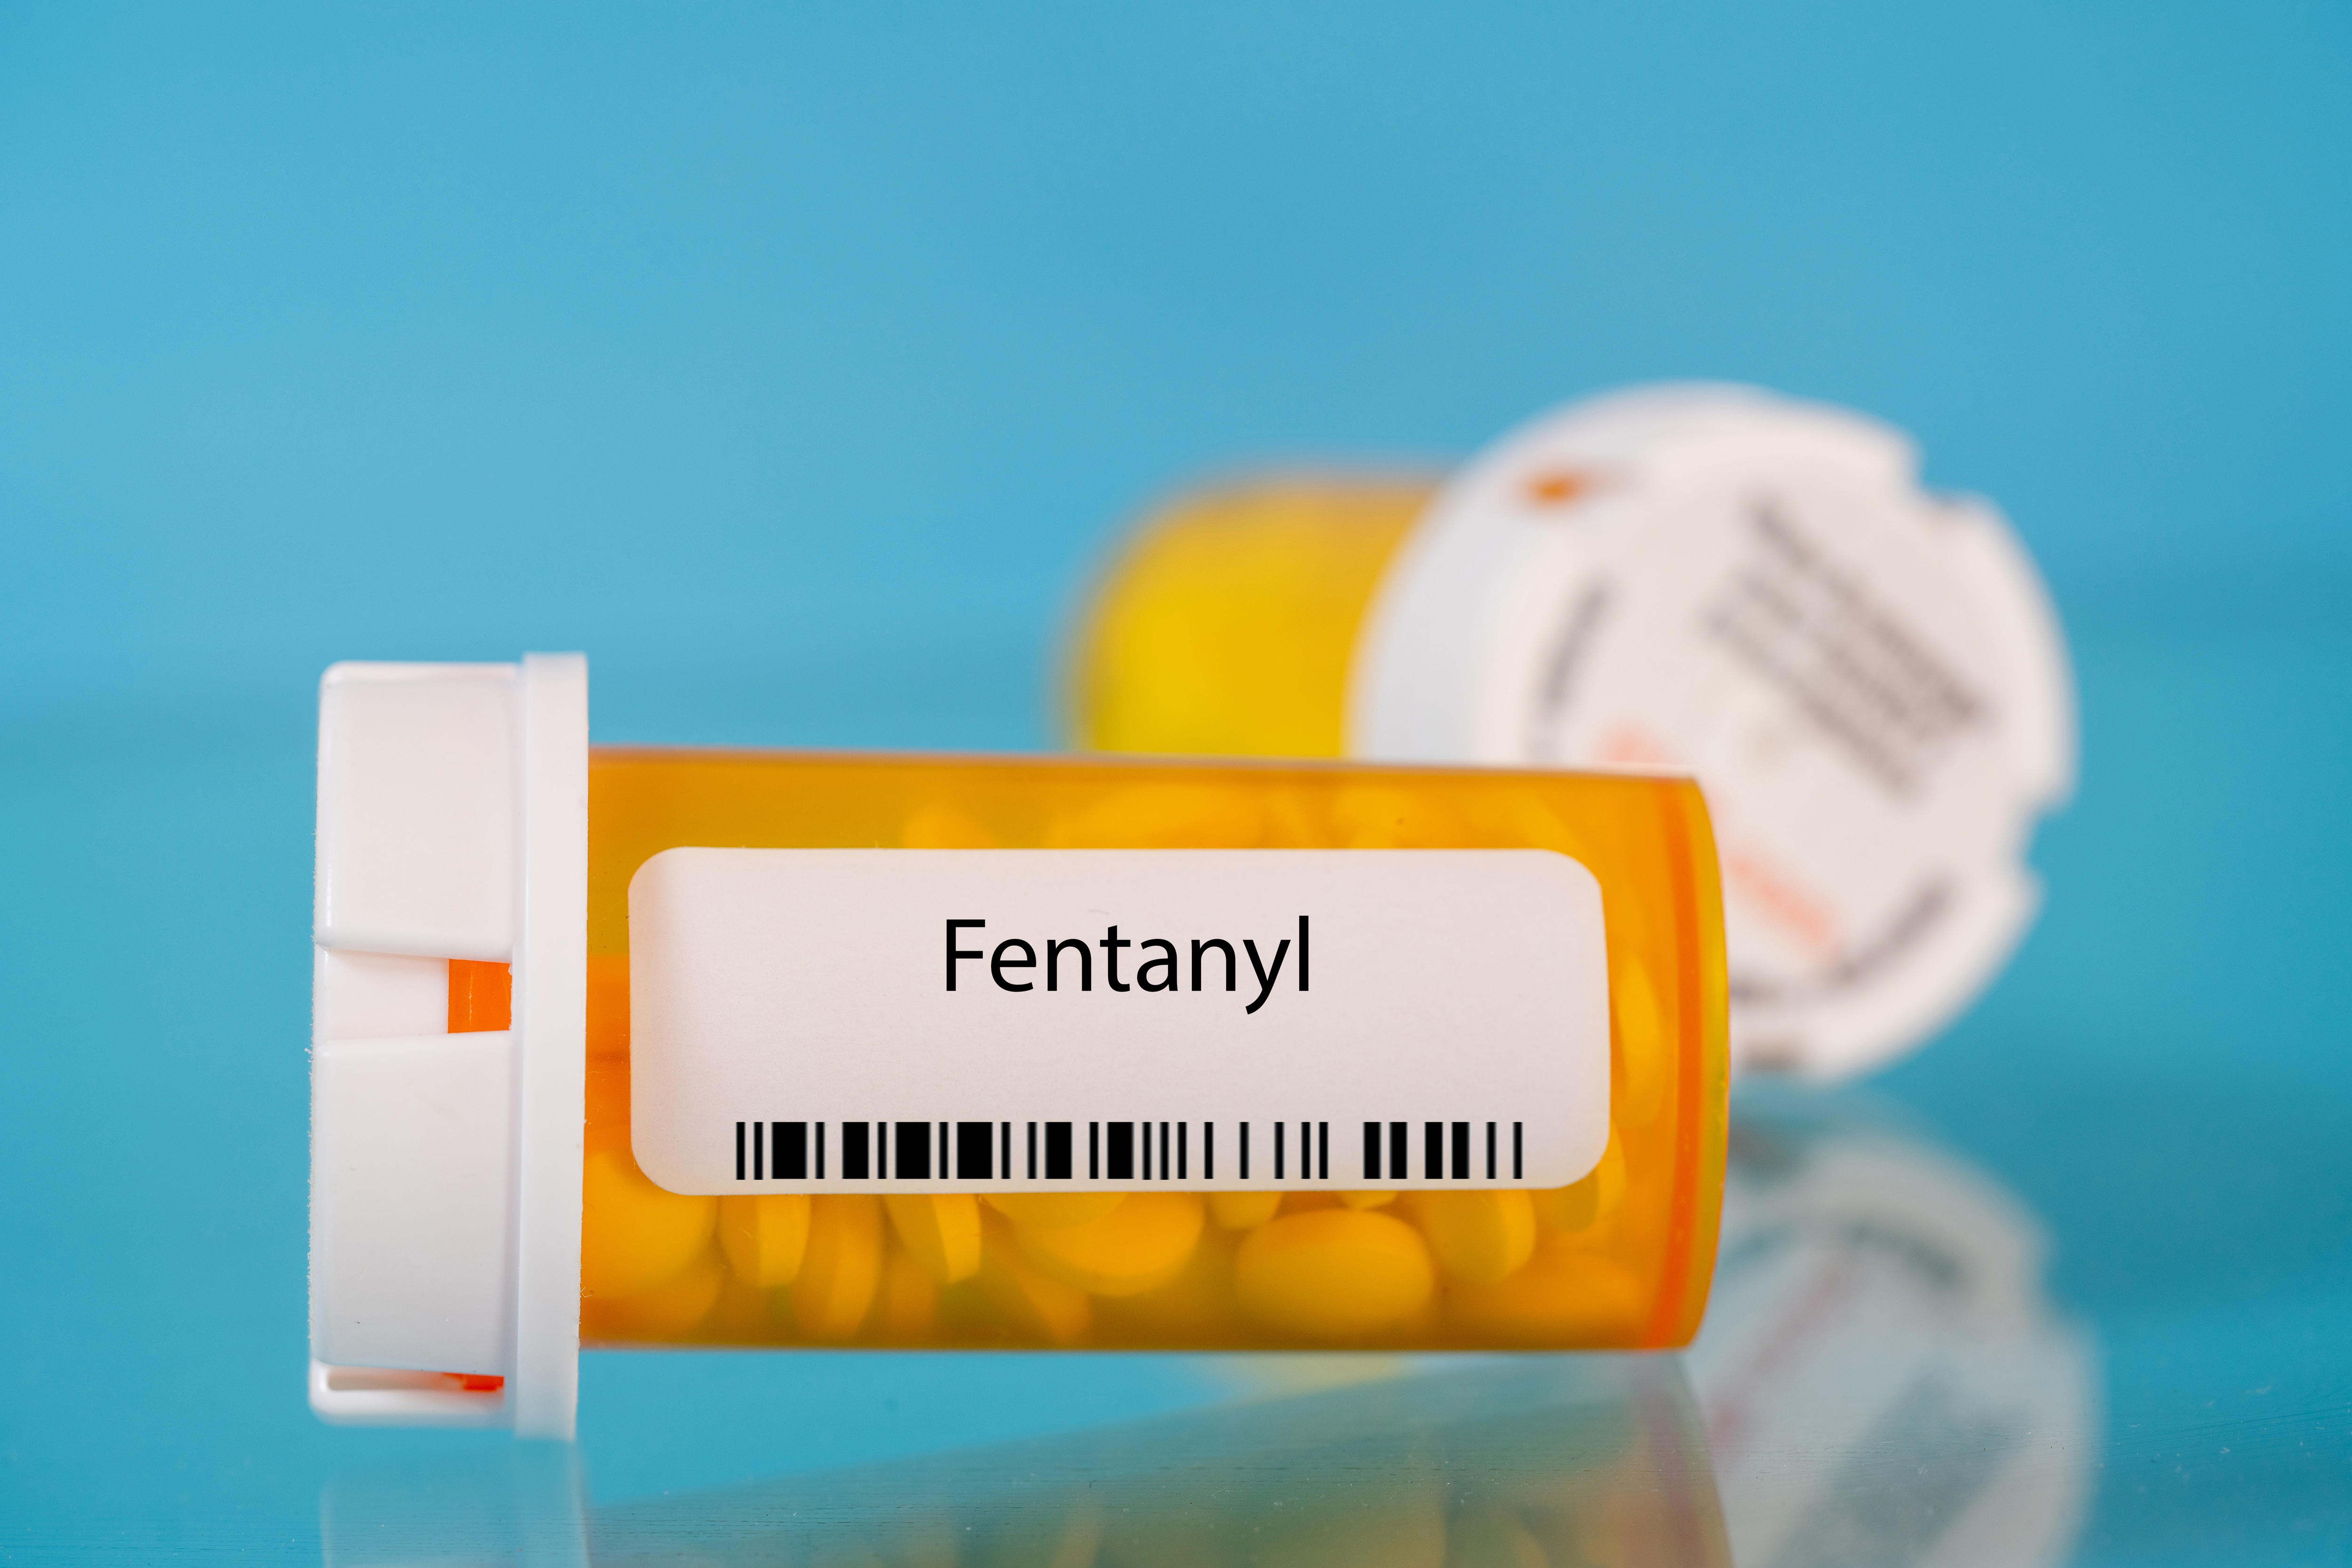 How Fentanyl became the most dangerous illegal drug in America